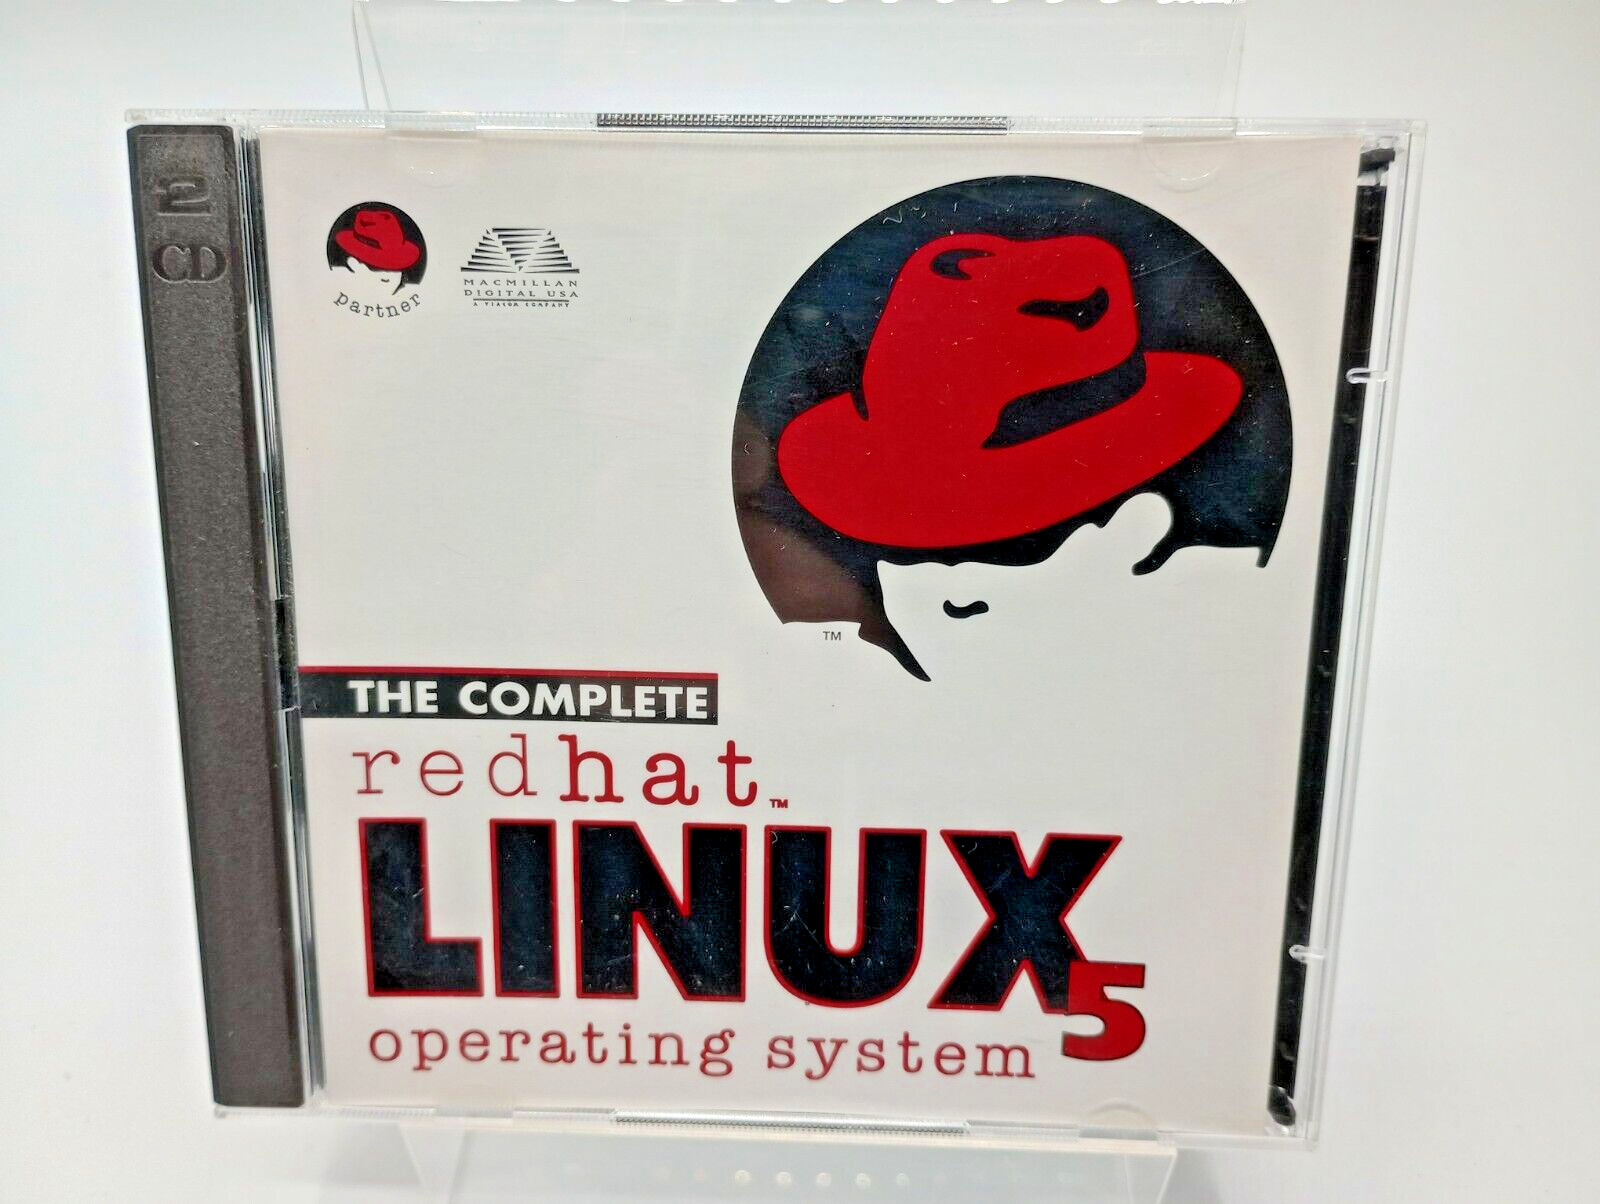 The Complete Redhat Linux 5 Operating System - 2 CD-ROMs